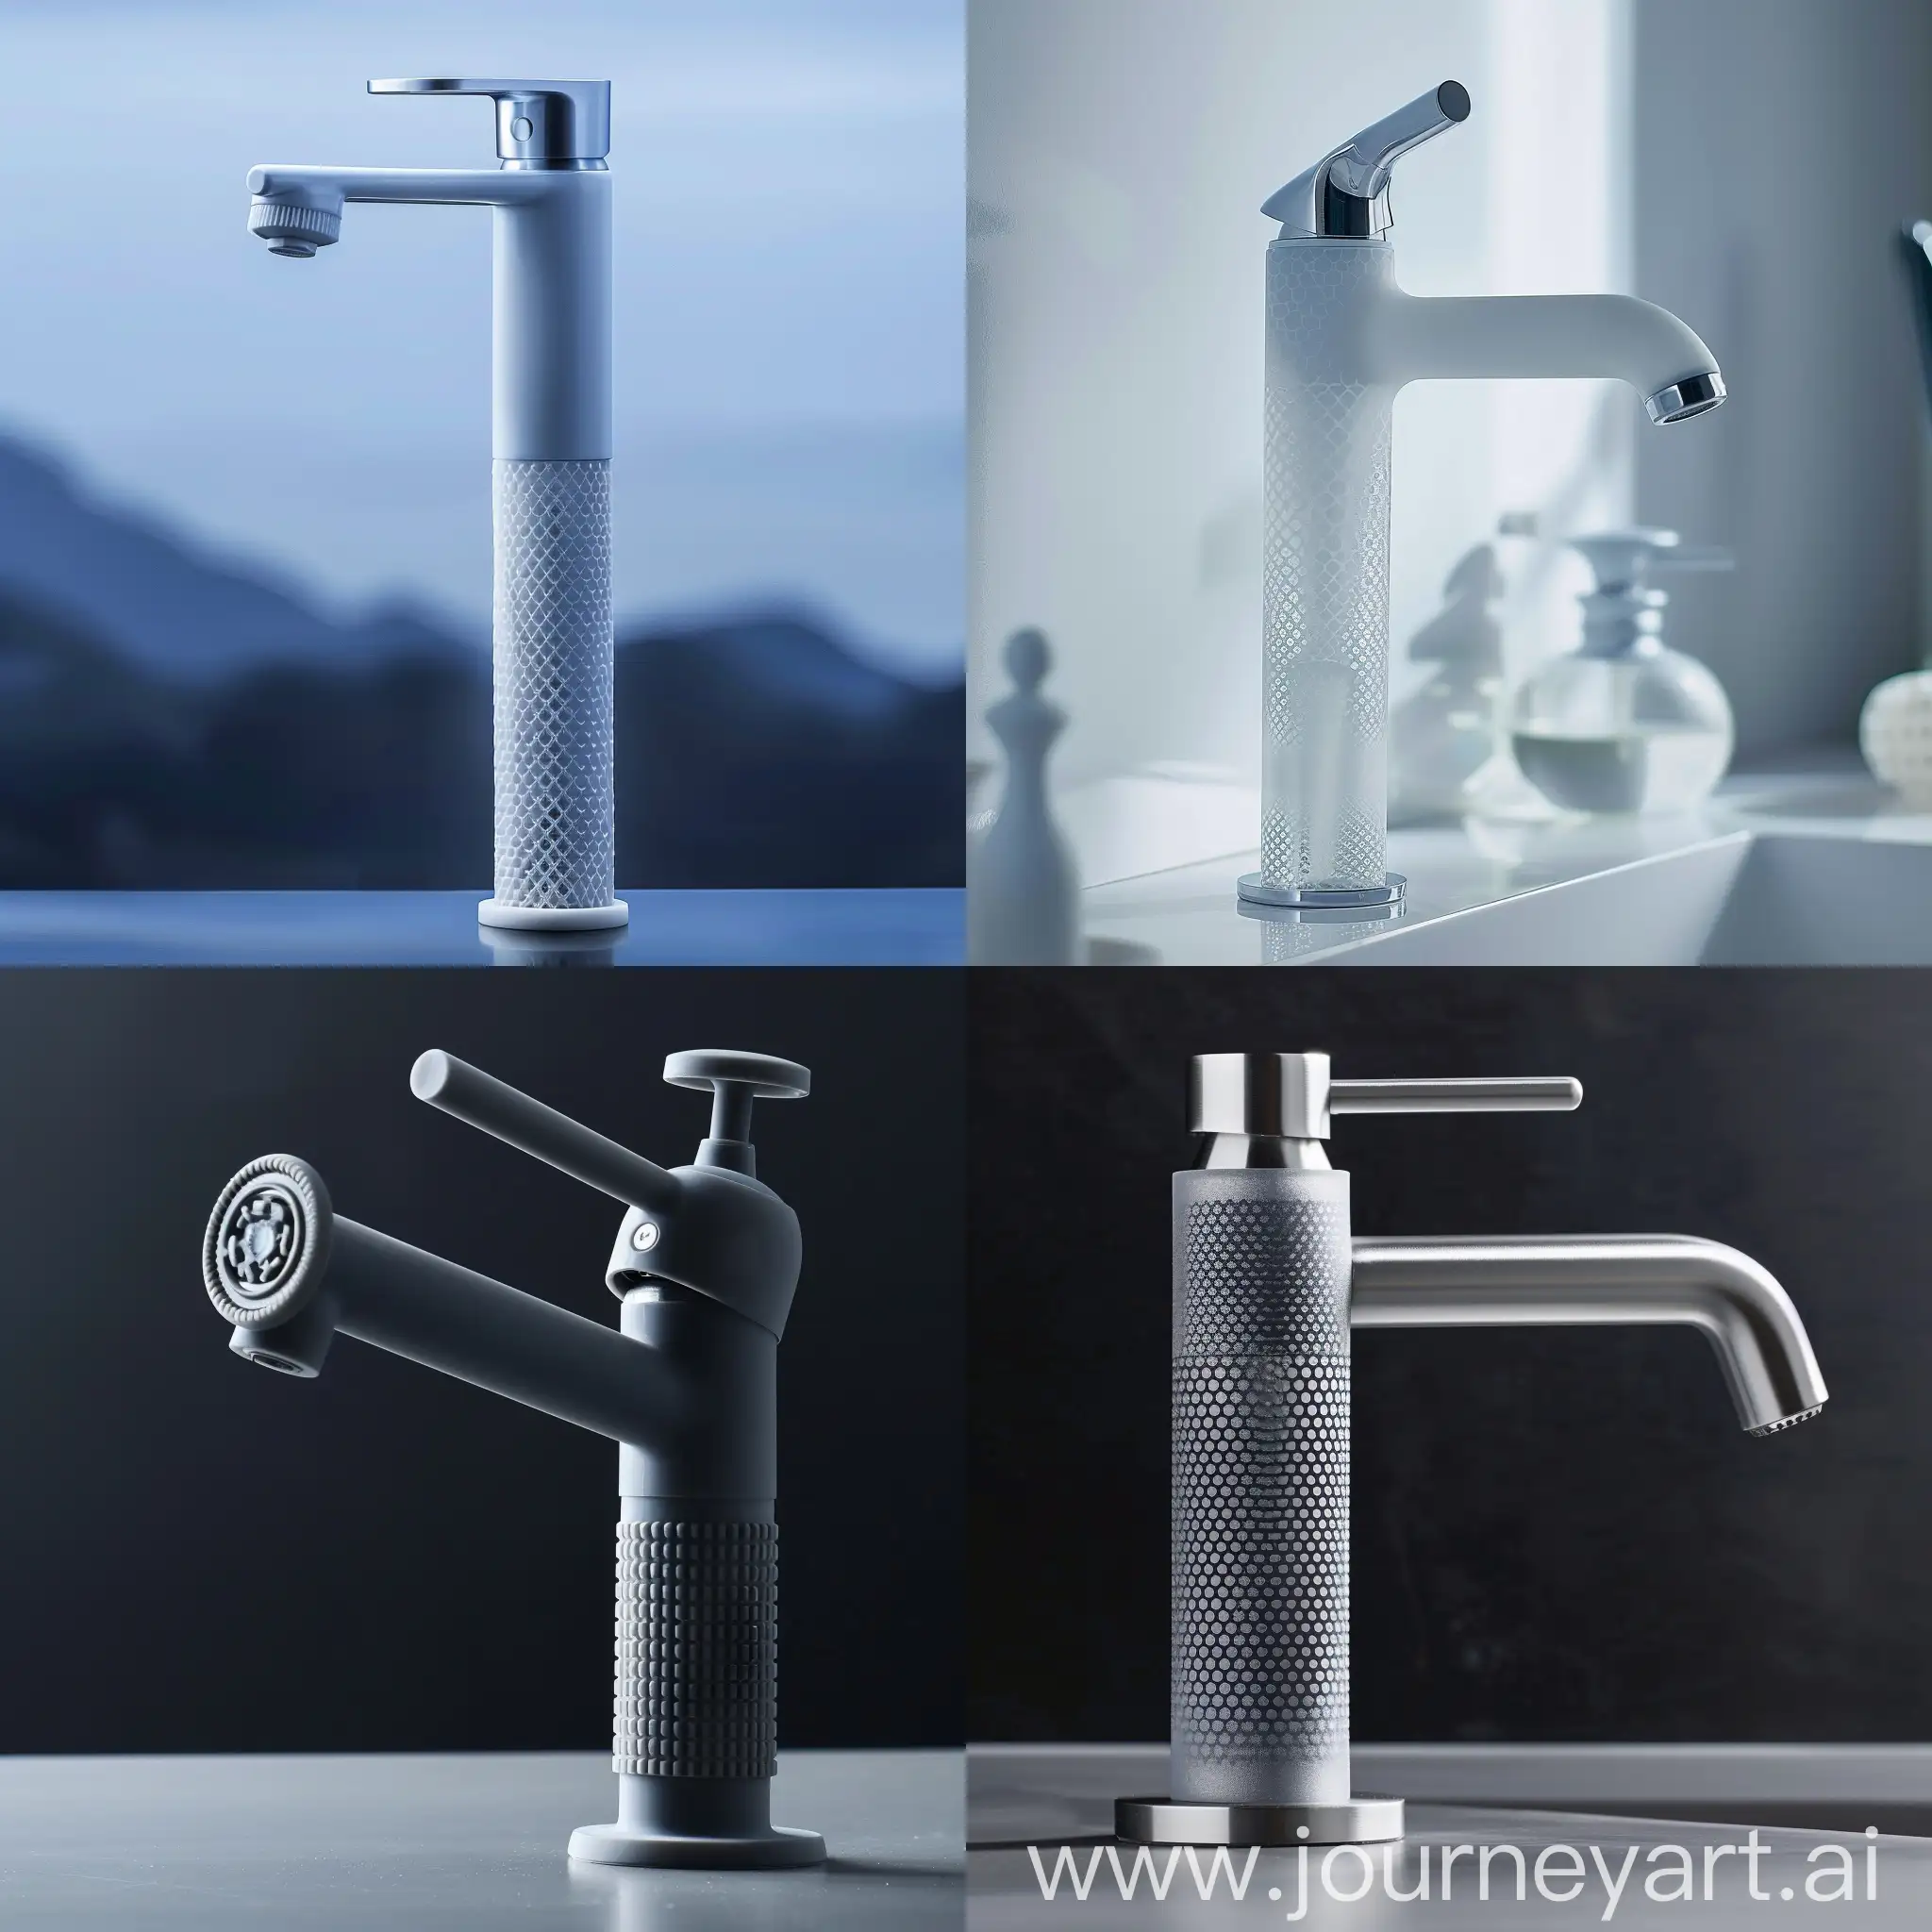 An innovative faucet, with a frosted surface treatment and a rotating water control valve as large as Chinese chess. The surface treatment has special patterns to increase the touch power. The handle connecting the rotating head is short and cute, and the overall faucet is treated with a guide angle, making it feel comfortable, approachable, minimalist, advertising photography, and studio lighting